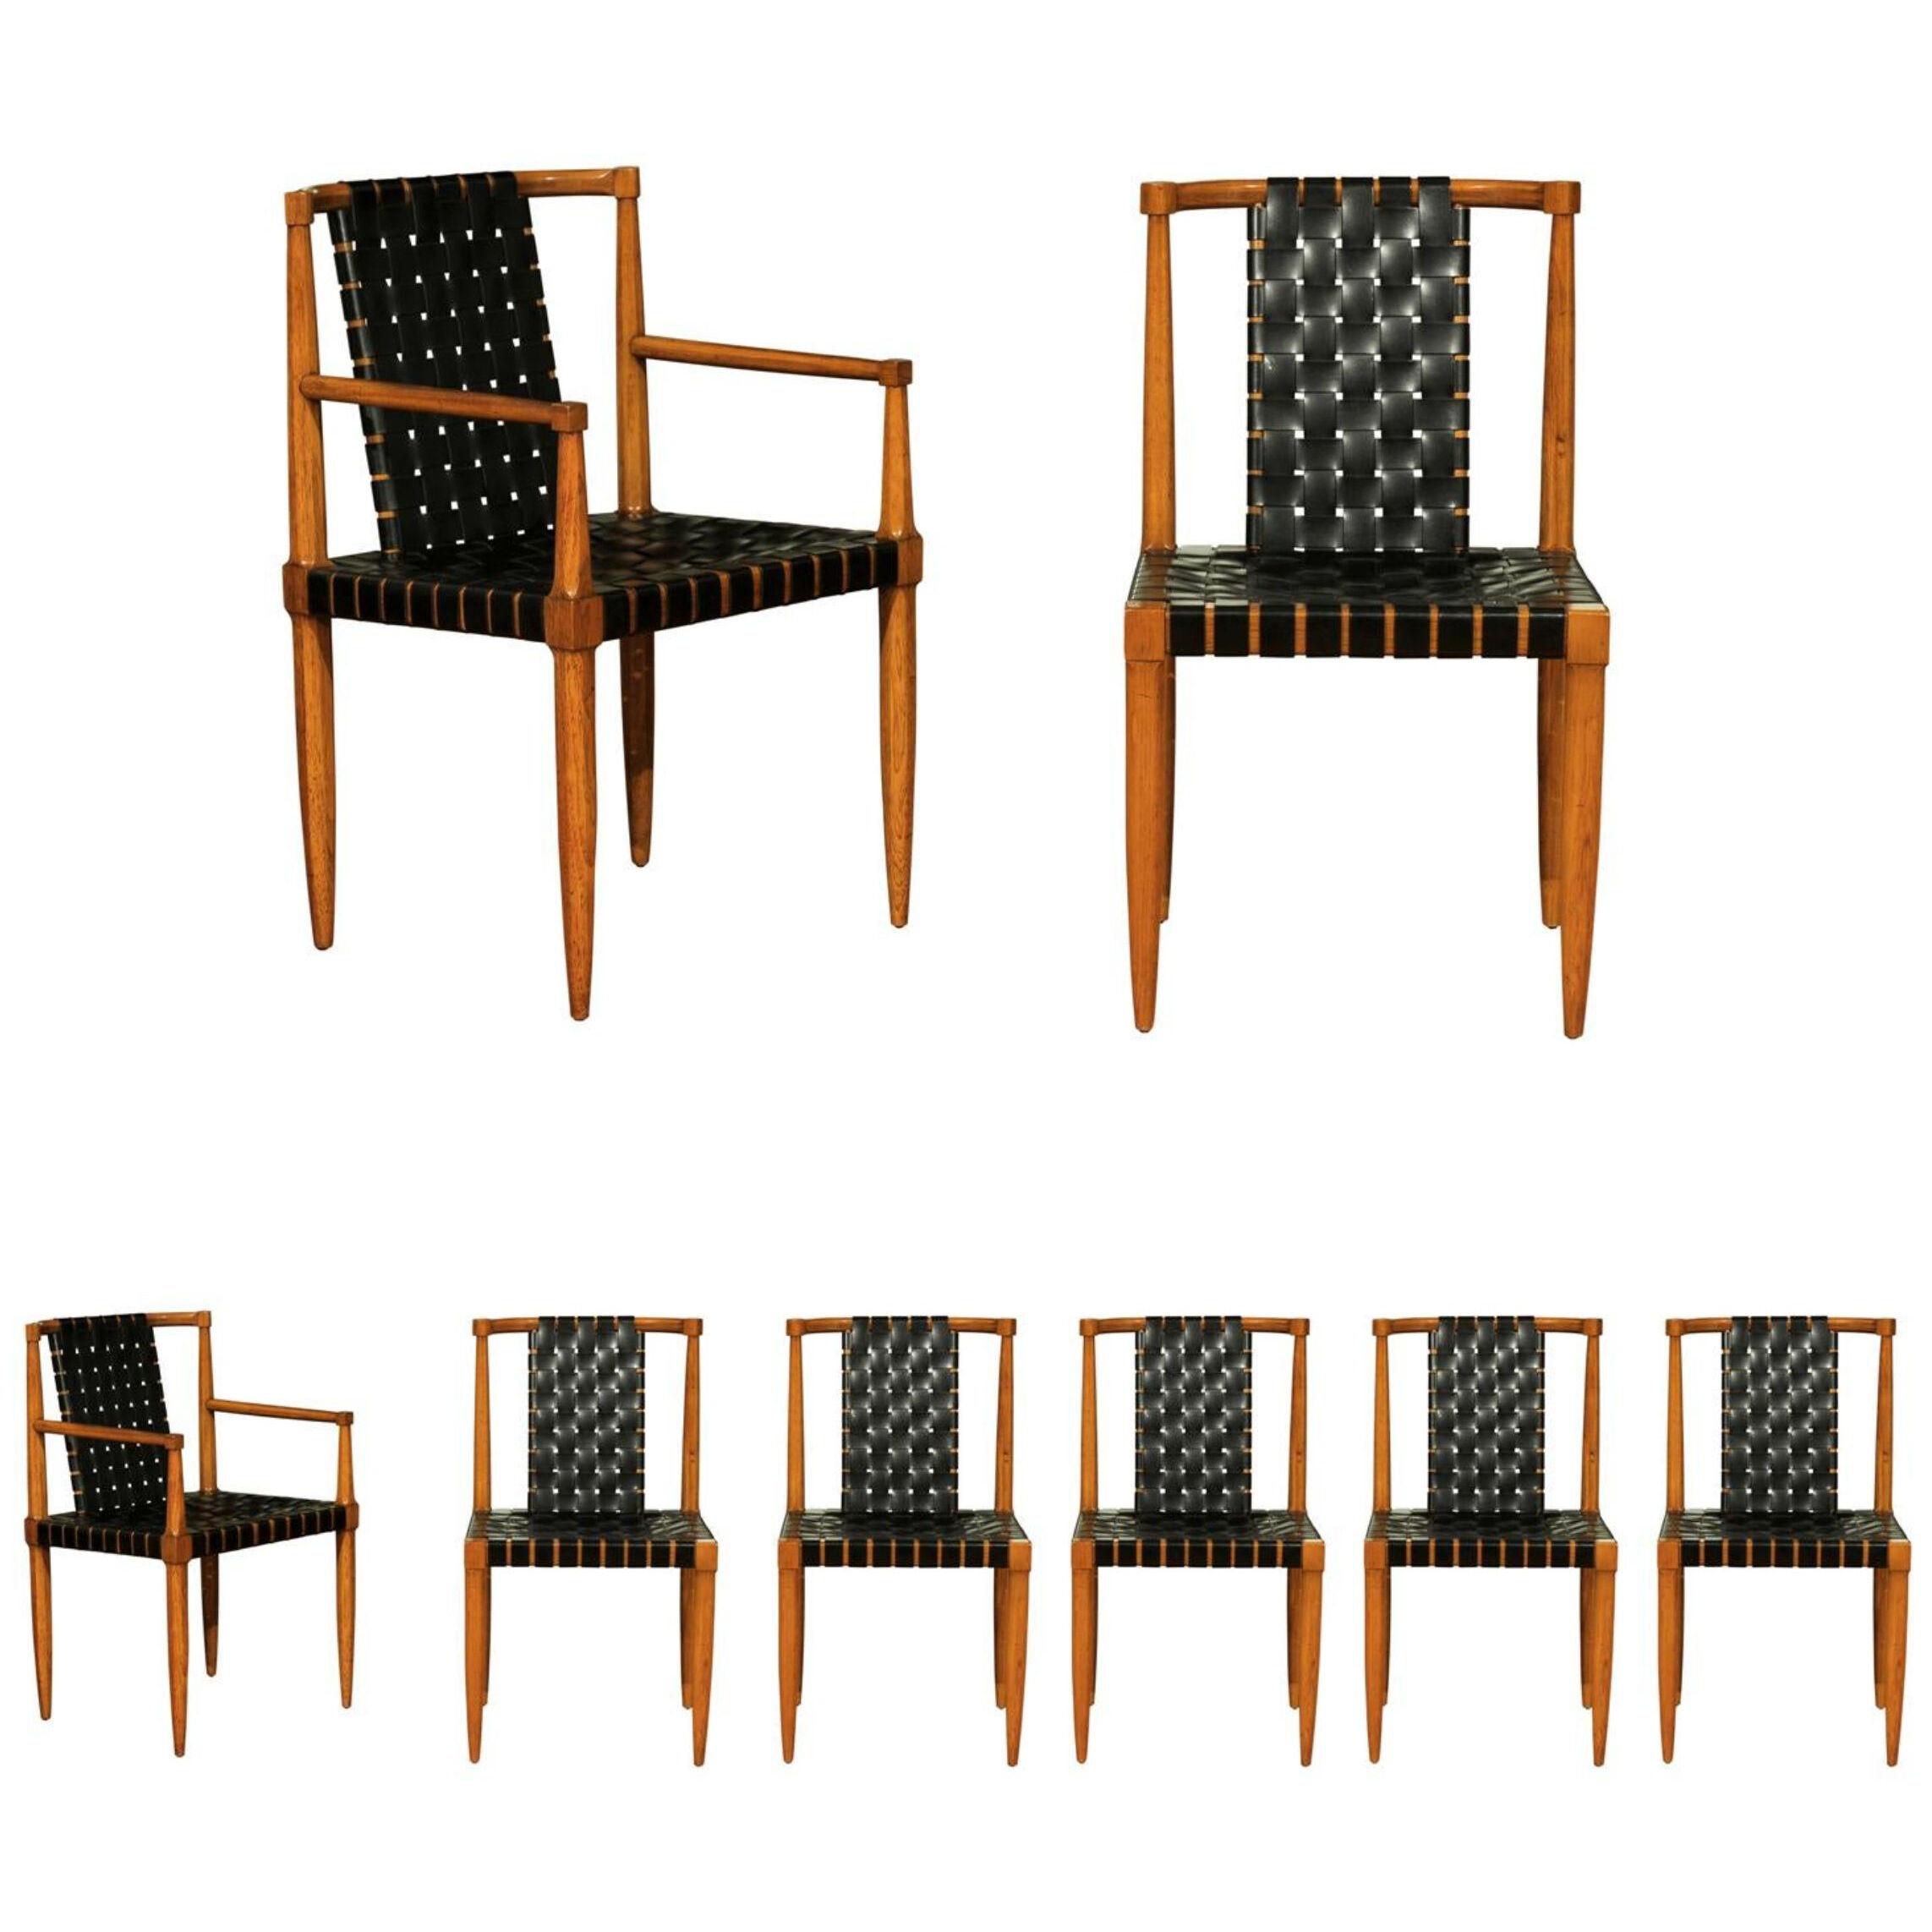 Miraculous Rare Set of 8 Leather Strap Dining Chairs by Tomlinson, dated 1958